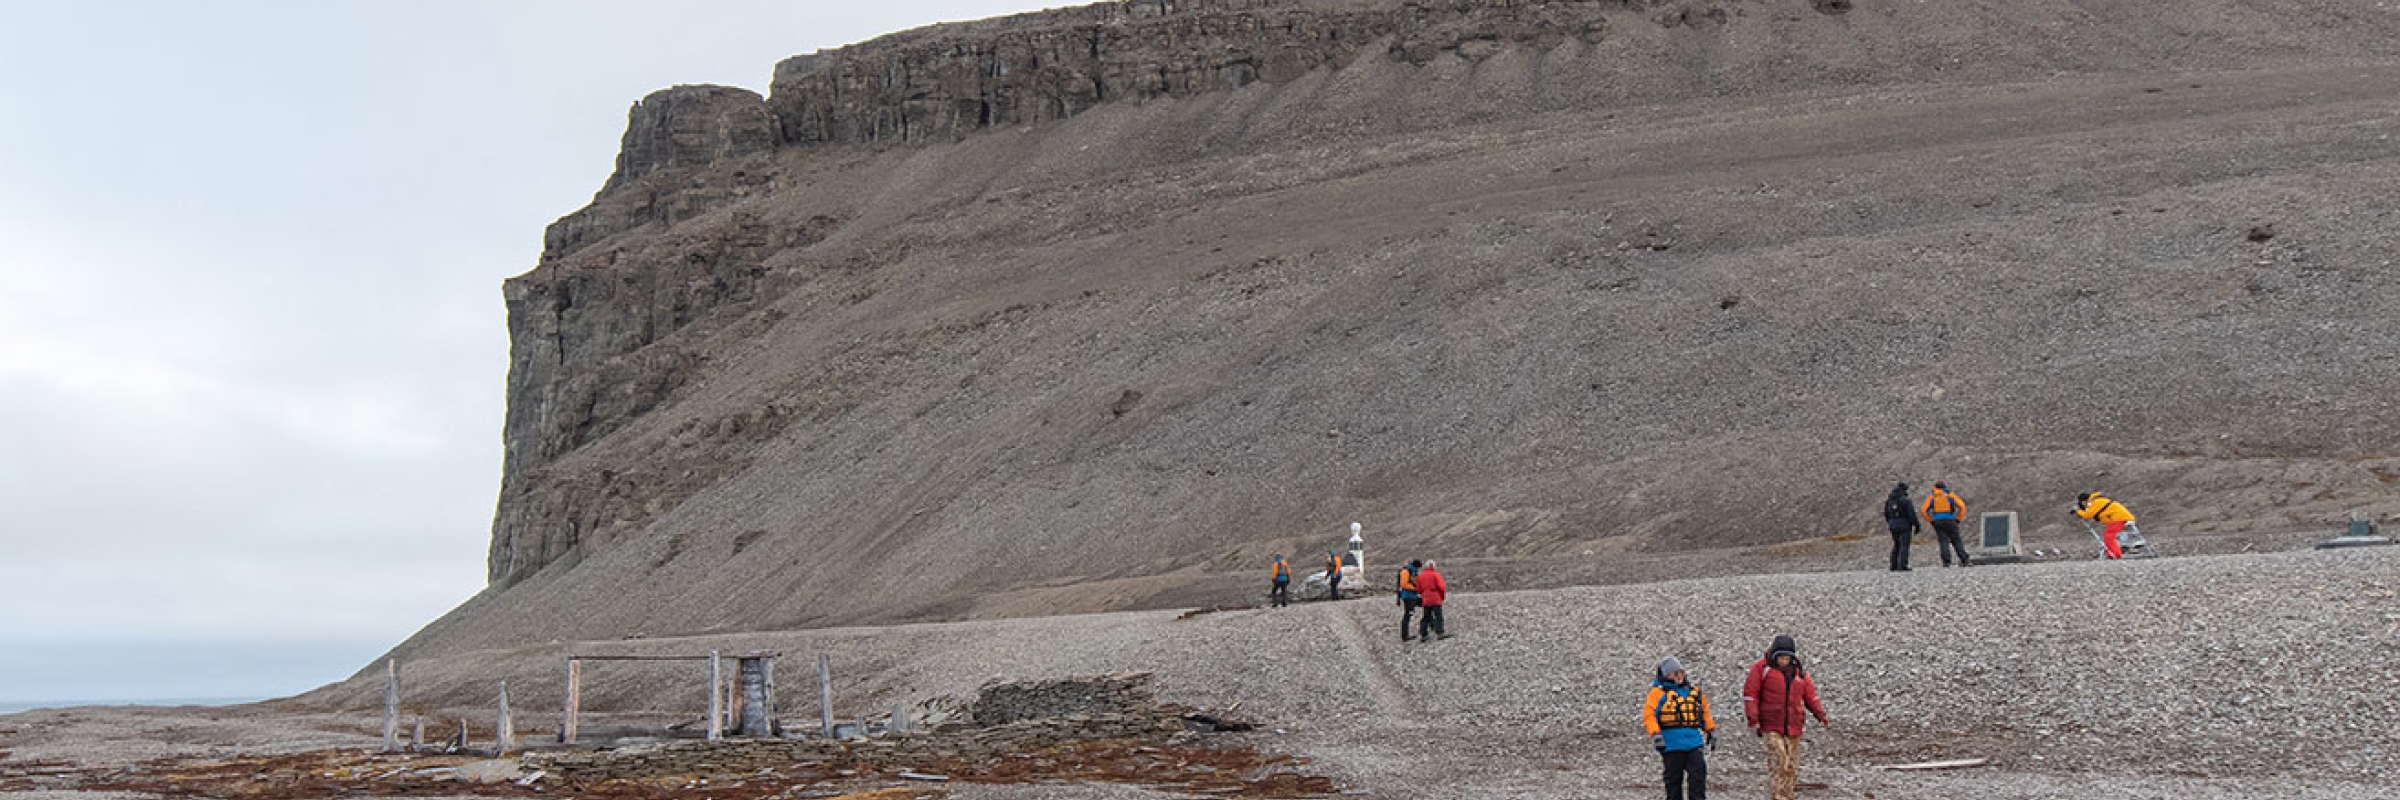 Guests exploring Beechey Island, Nunavut in the Canadian High Arctic - Photo by Michelle Sole